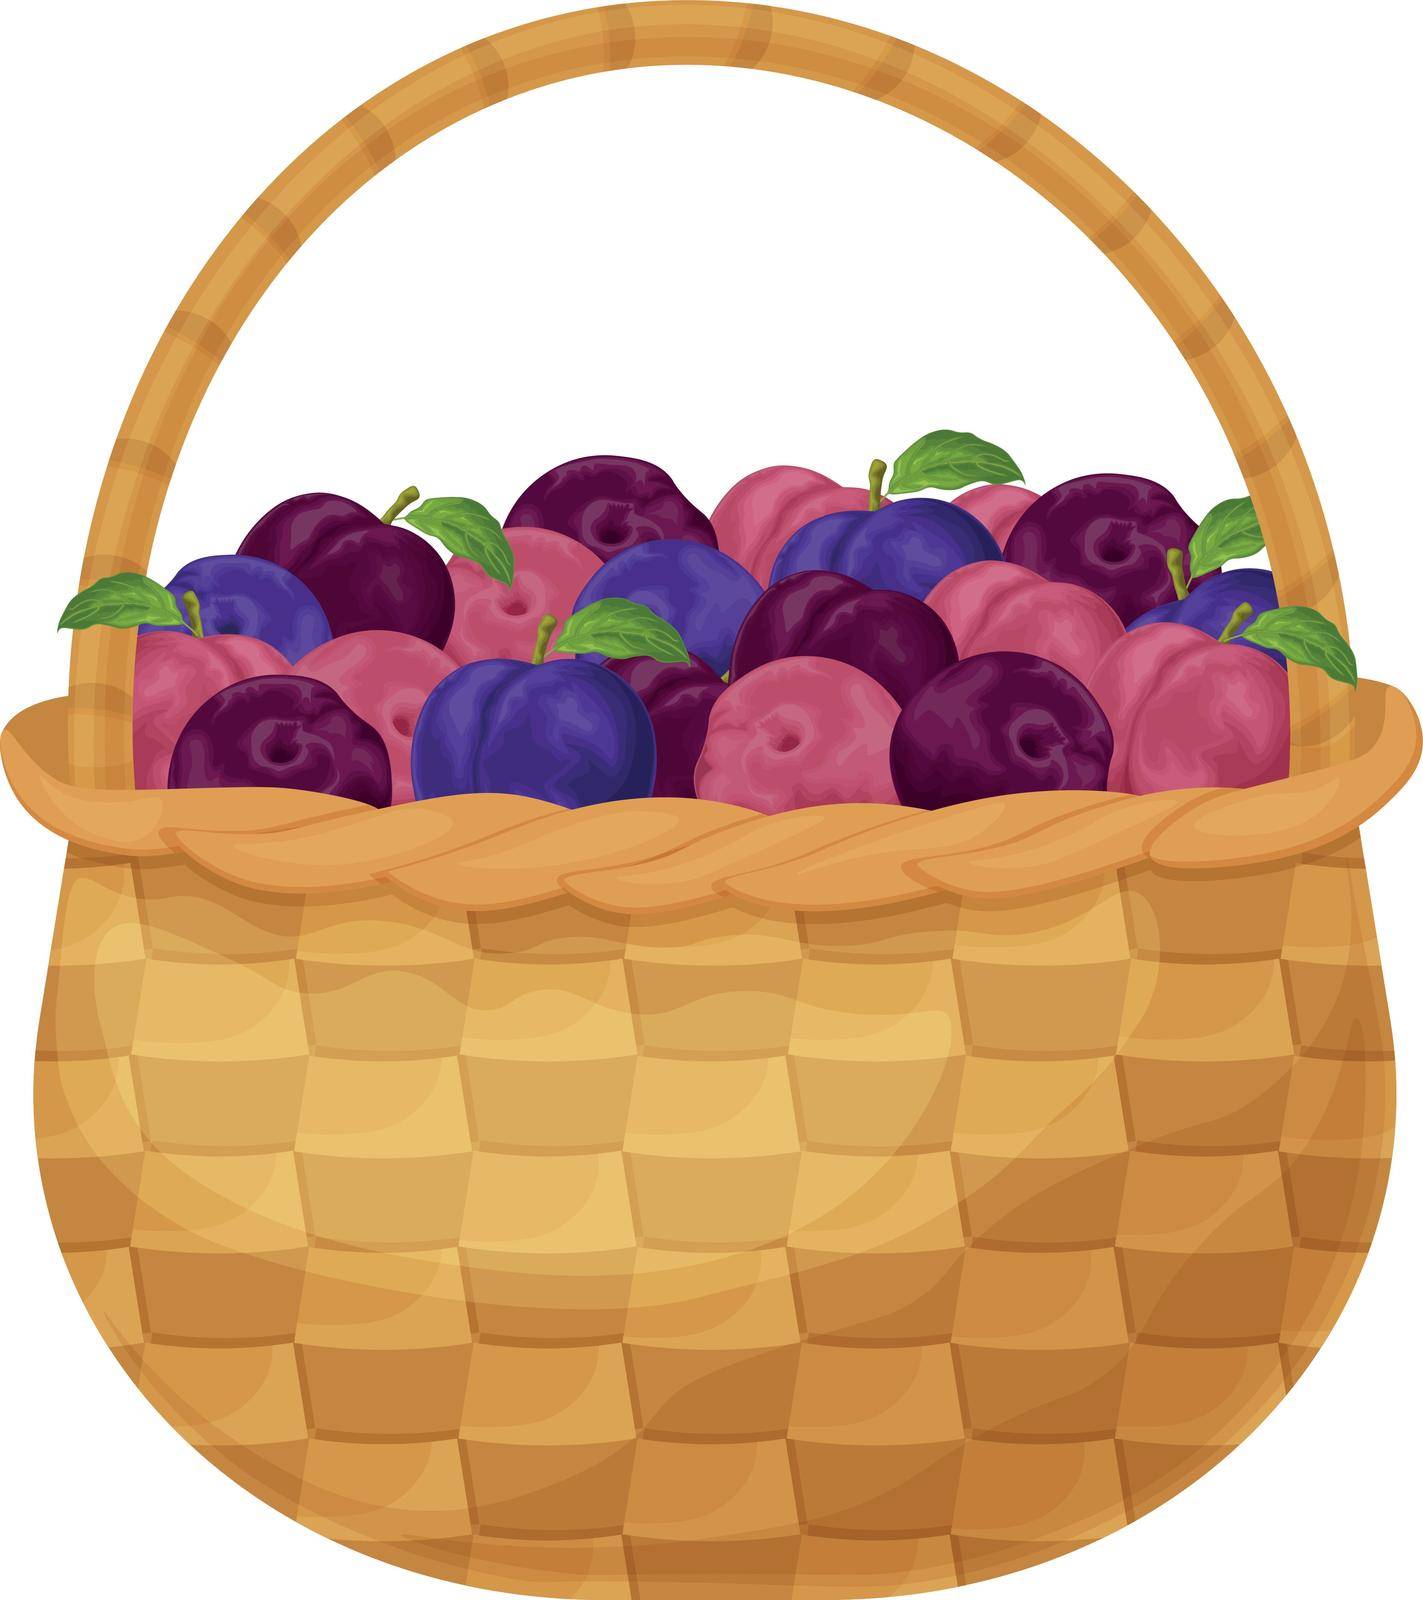 Plums. Ripe plums in the basket. Basket with fresh plums. Garden fruits. Vegetarian organic products. Vector illustration isolated on a white background.